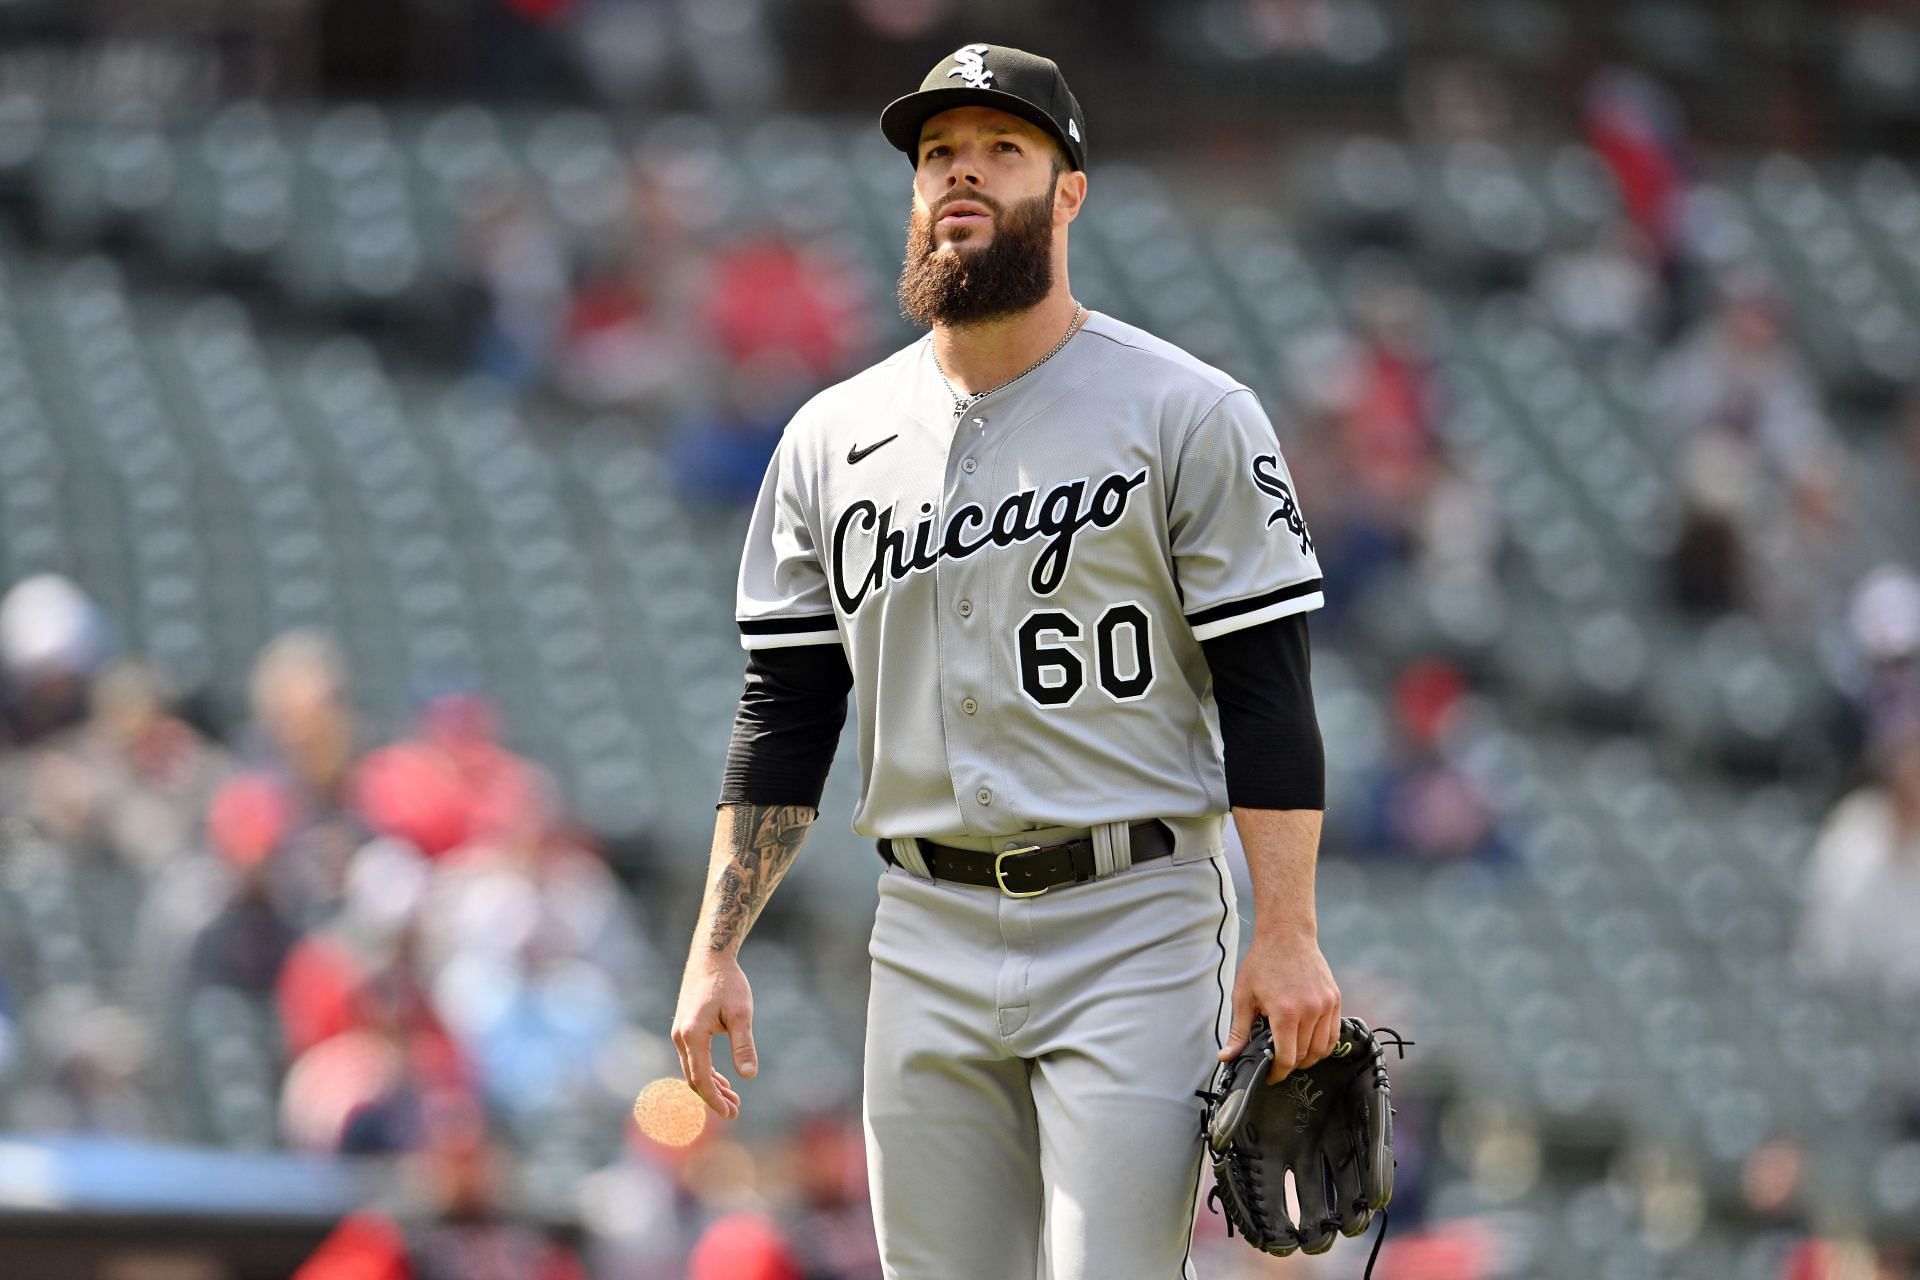 After being released to waivers by the Chicago White Sox, starting pitcher Dallas Keuchel signed a minor-league deal with the Arizona Diamondbacks